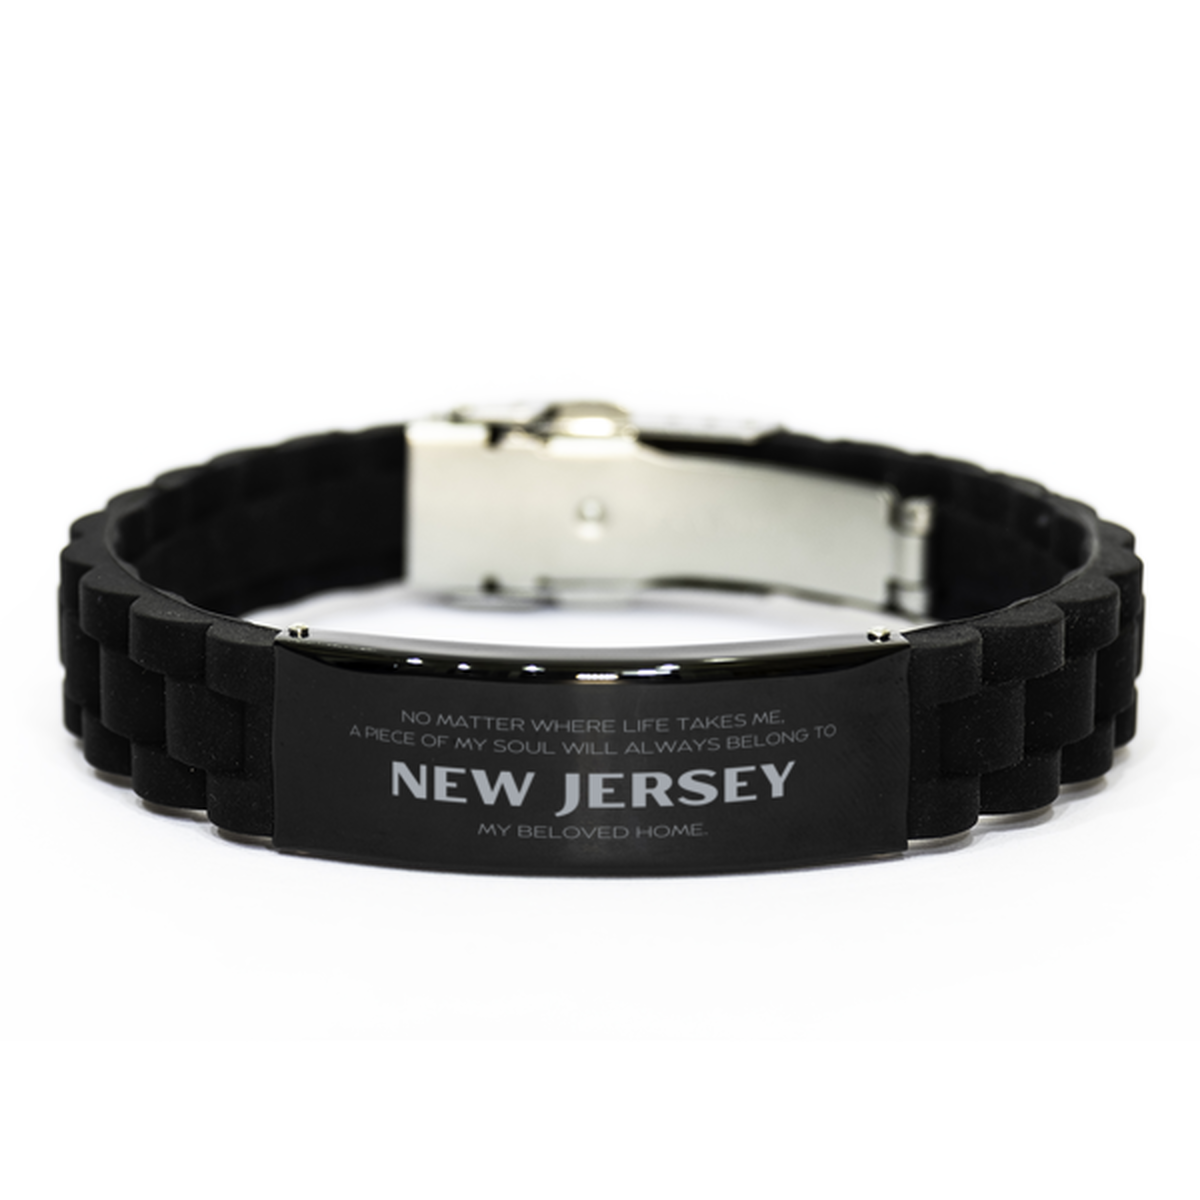 Love New Jersey State Gifts, My soul will always belong to New Jersey, Proud Black Glidelock Clasp Bracelet, Birthday Unique Gifts For New Jersey Men, Women, Friends